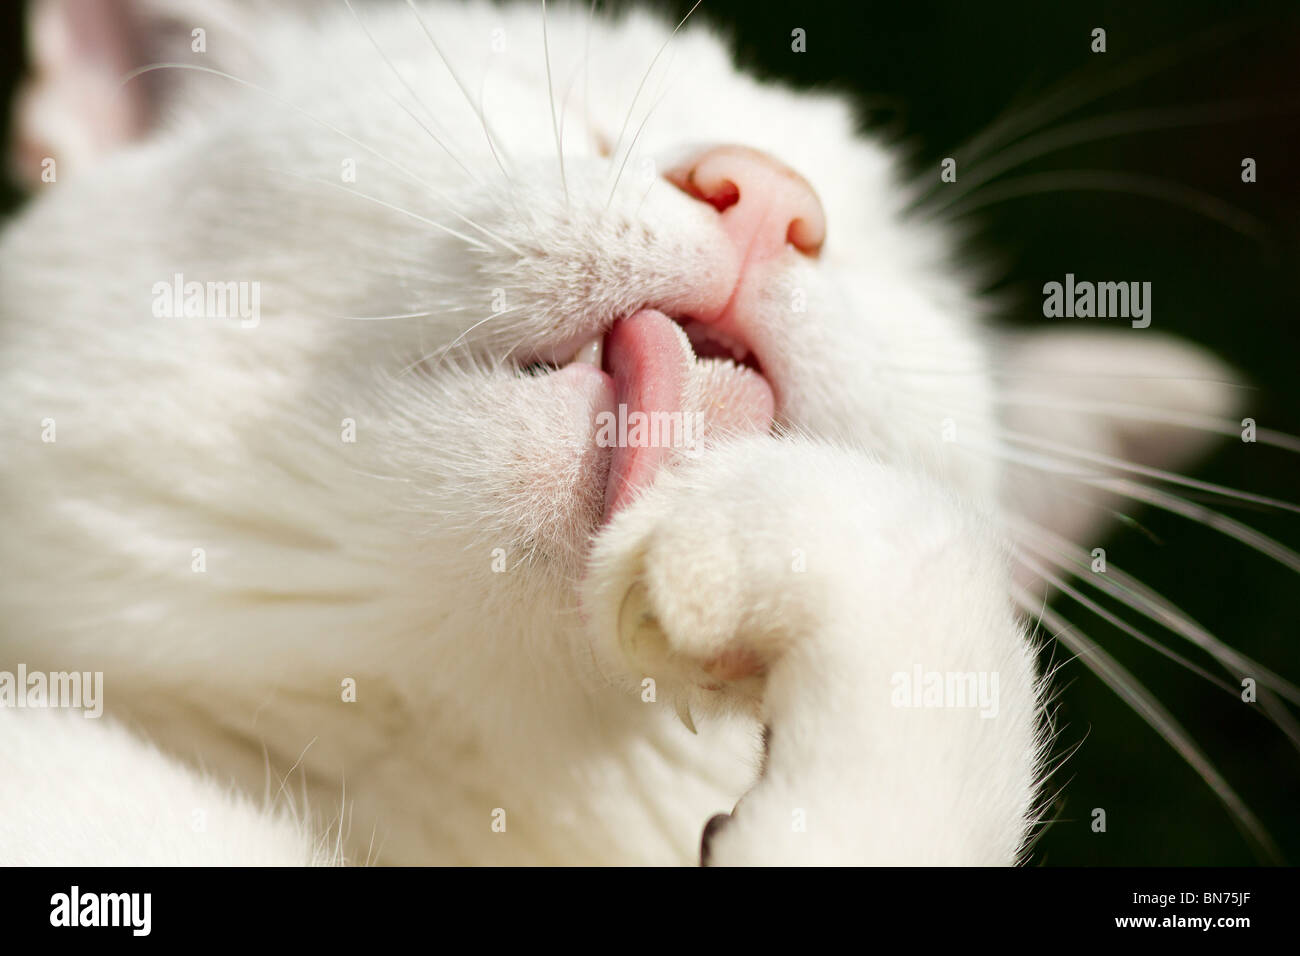 Young female pet cat (Felis catus) grooming herself by first licking her paw with her barbed tongue Stock Photo